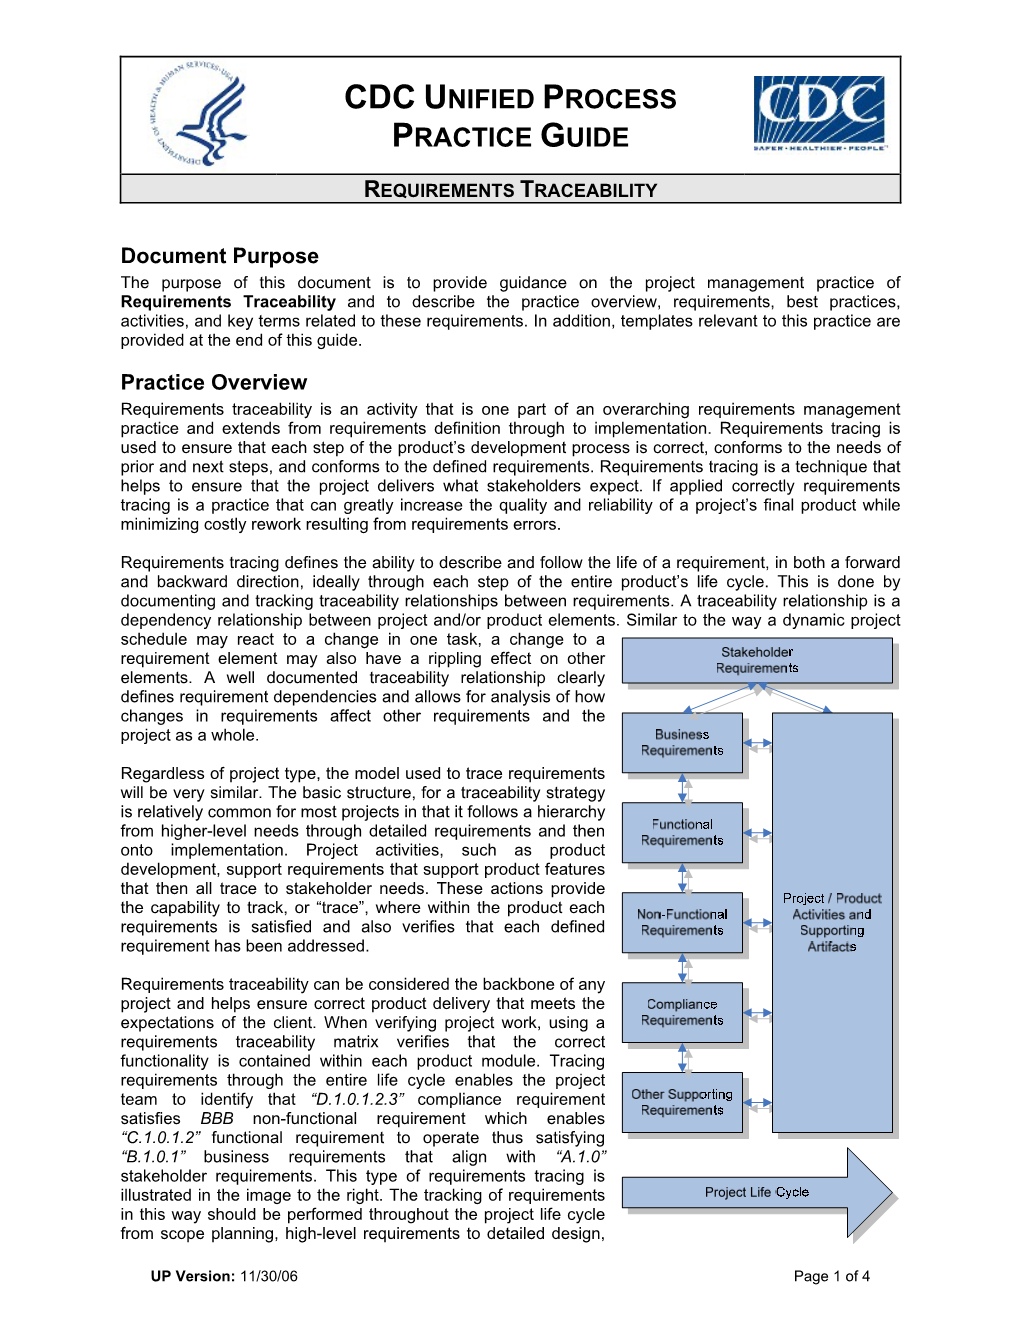 Requirements Traceability Practices Guide